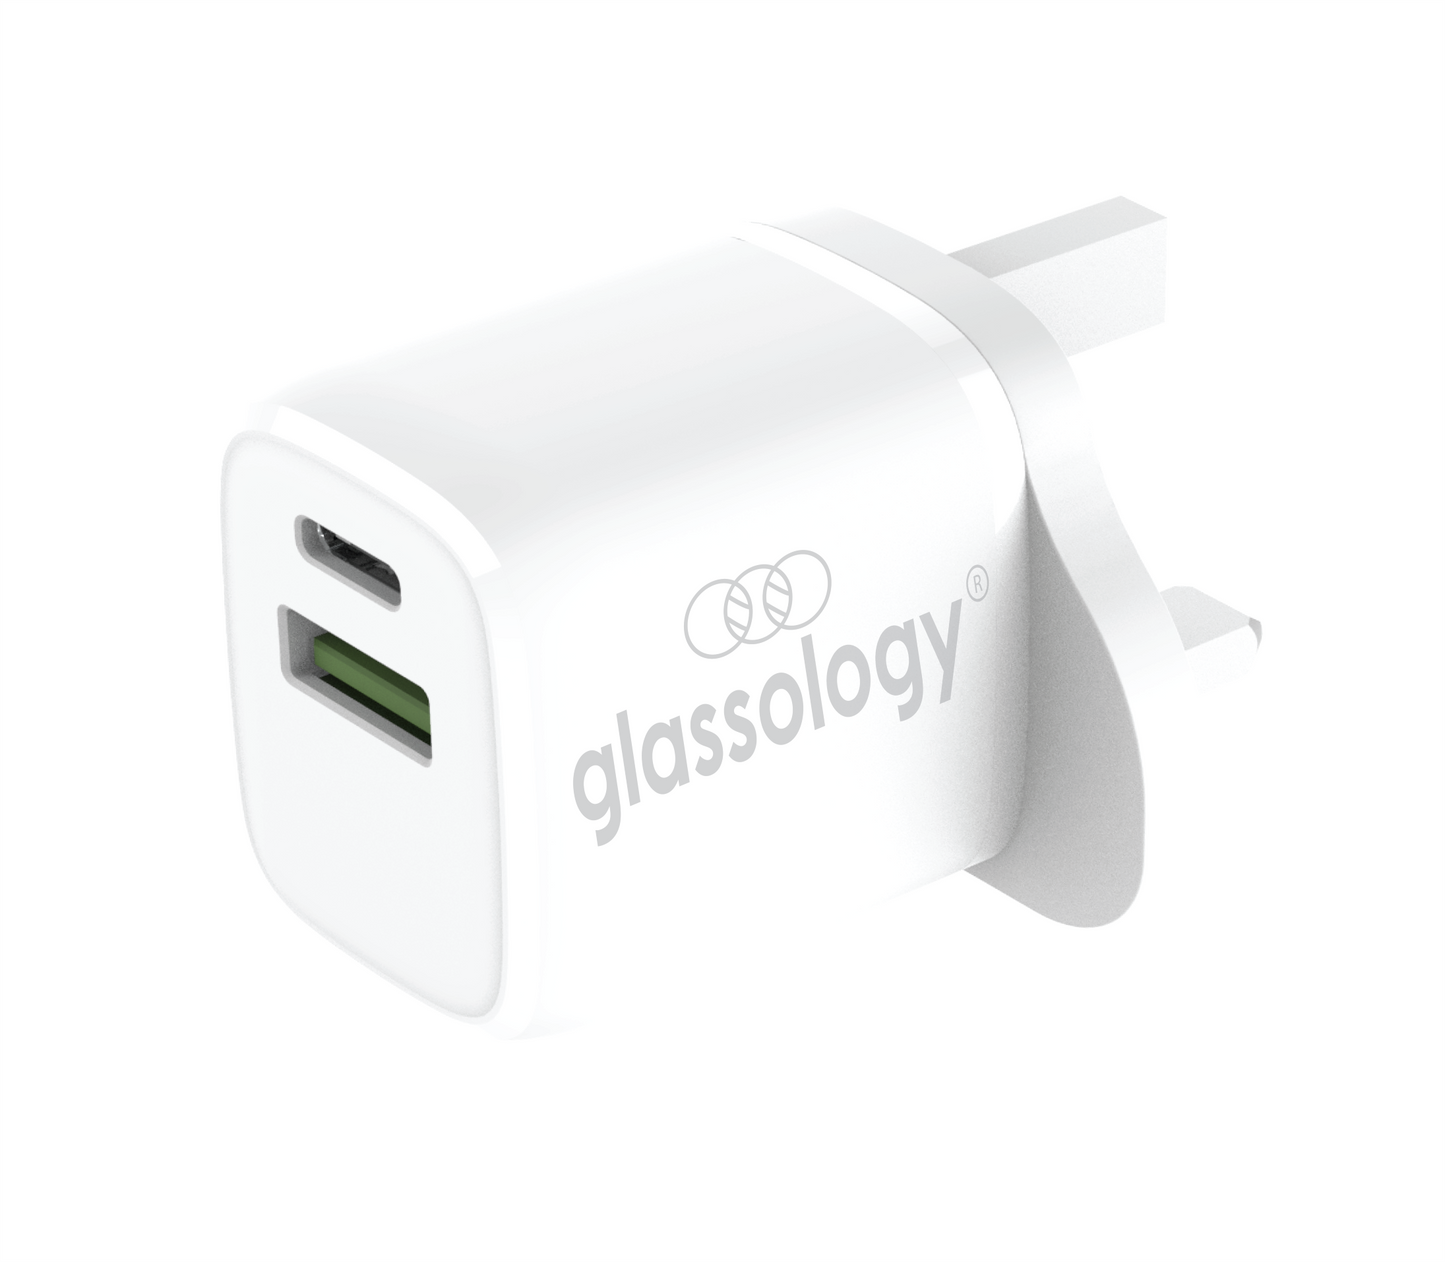 Glassology GTFC01 Dual Port Wall Charger White